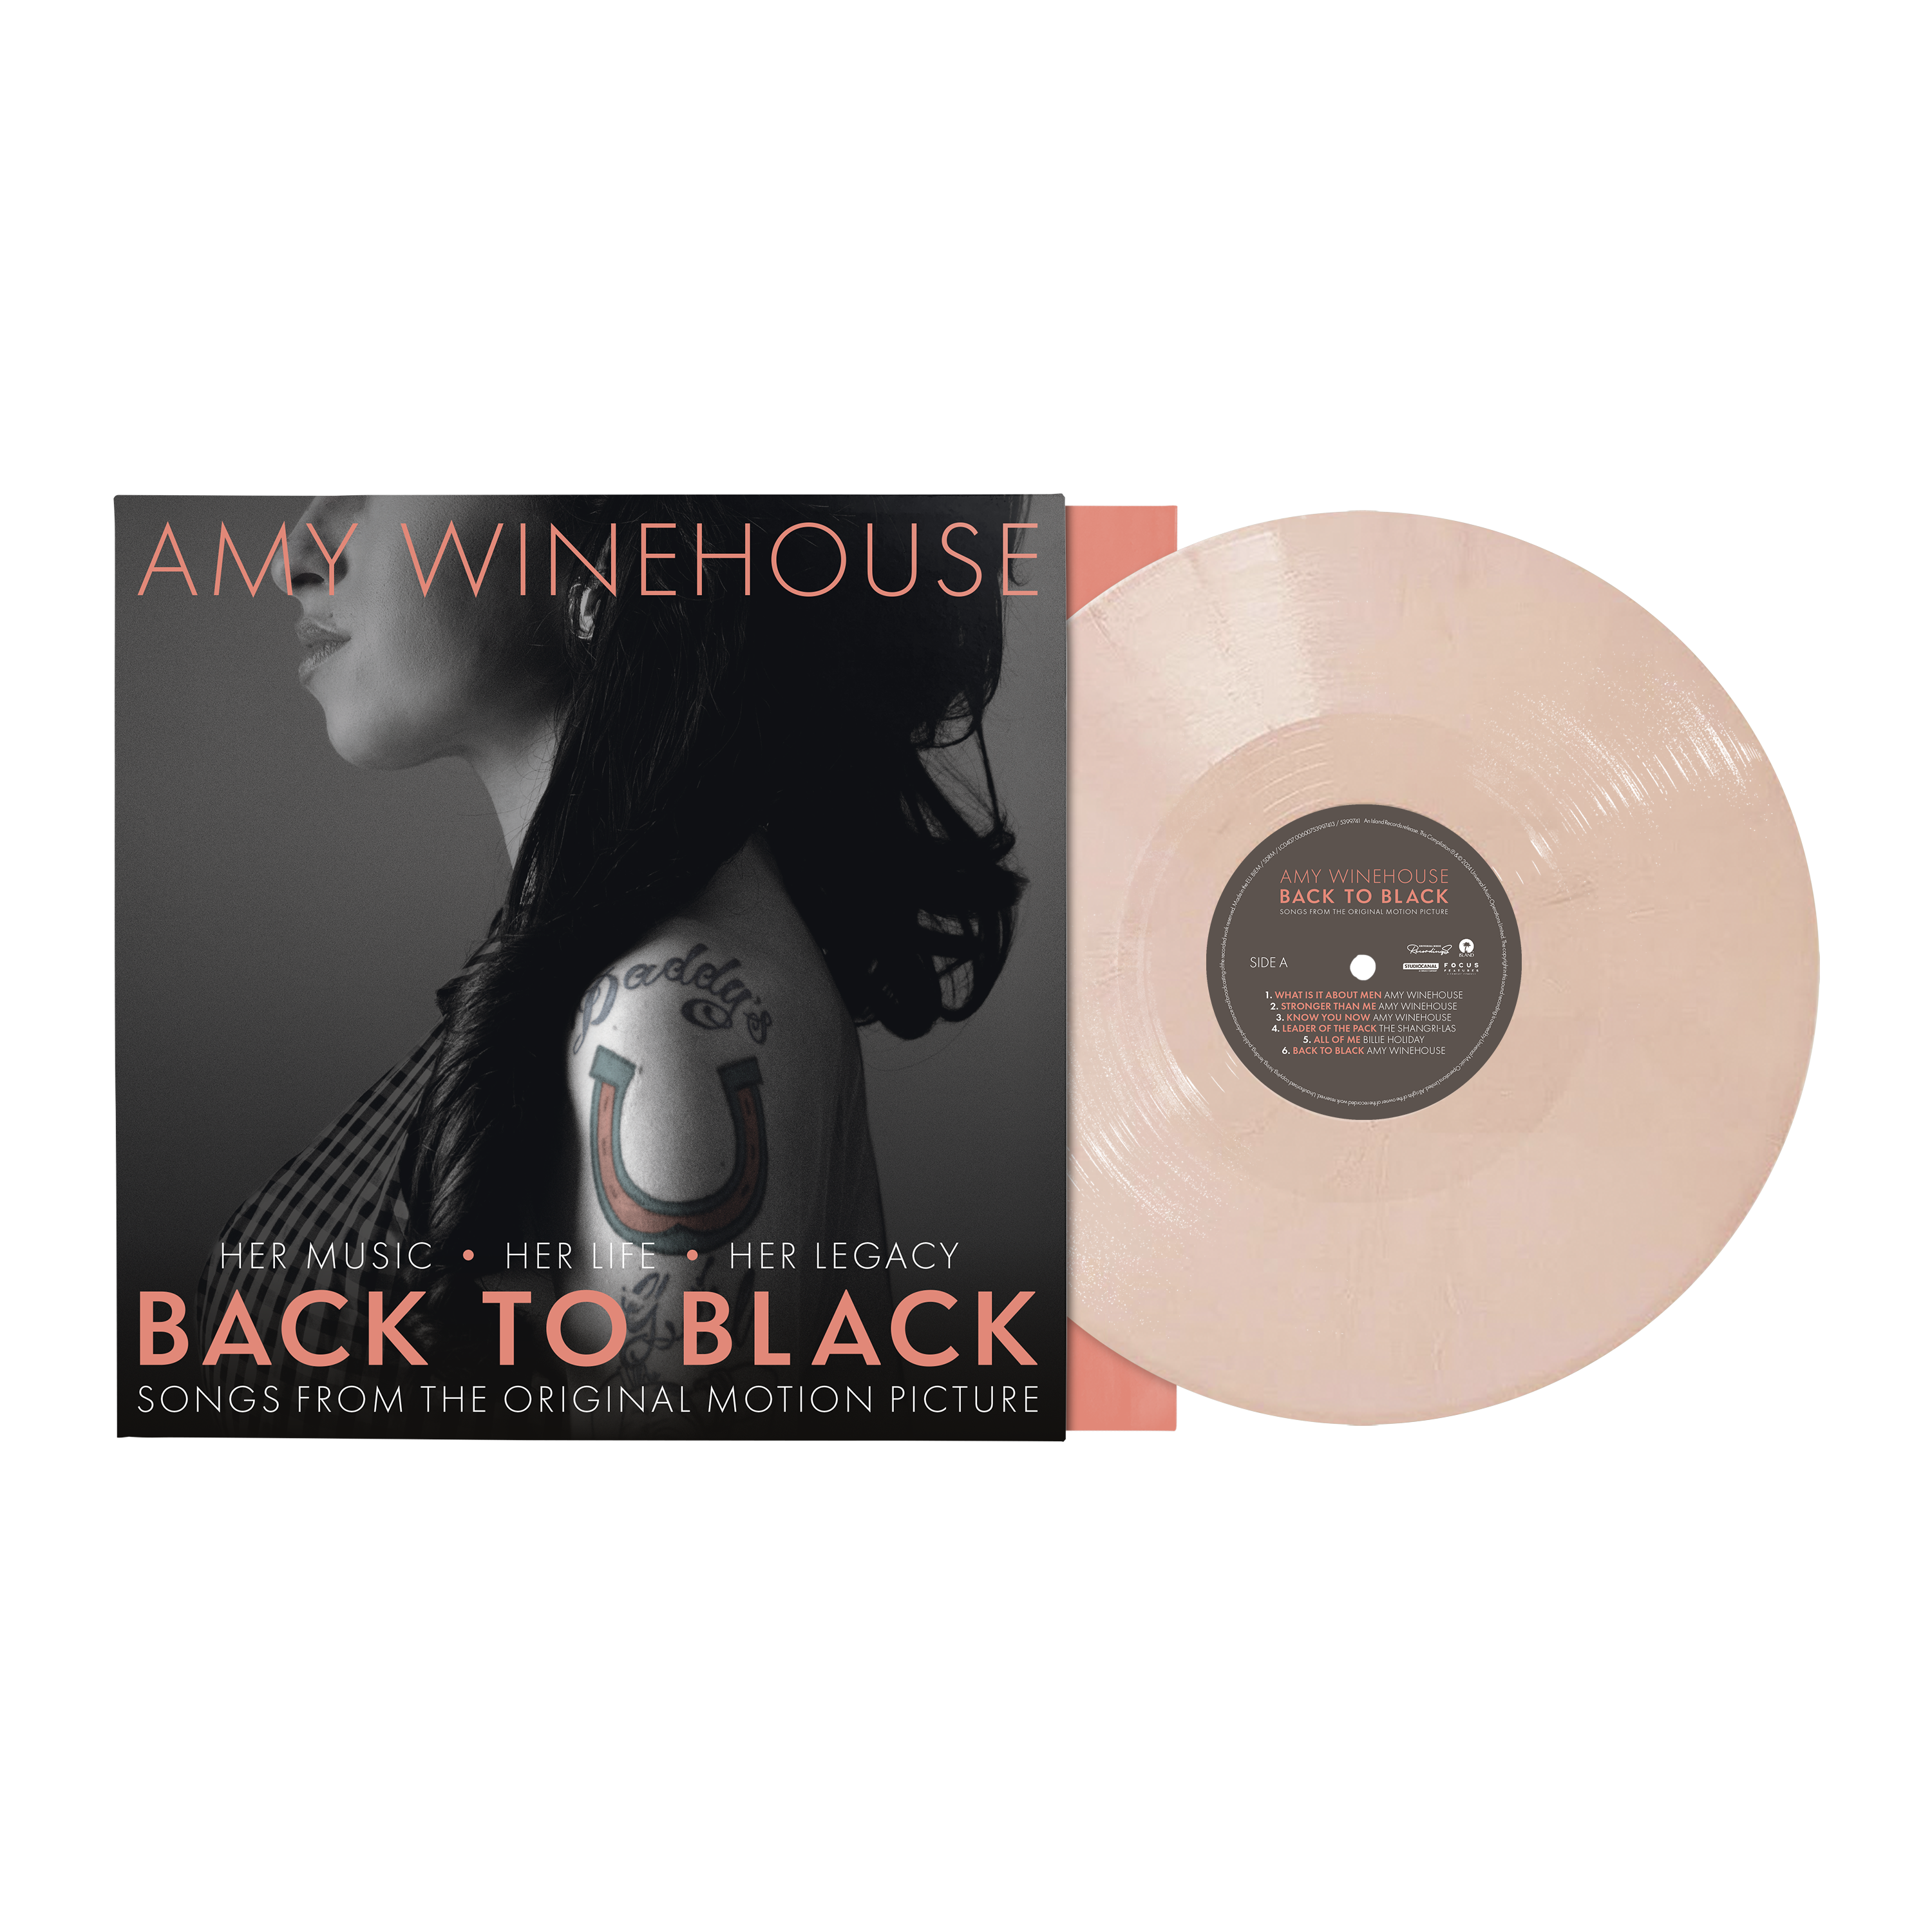 Back To Black - Songs From The Original Motion Picture: Exclusive Peach Vinyl LP + Portrait Washed T-Shirt